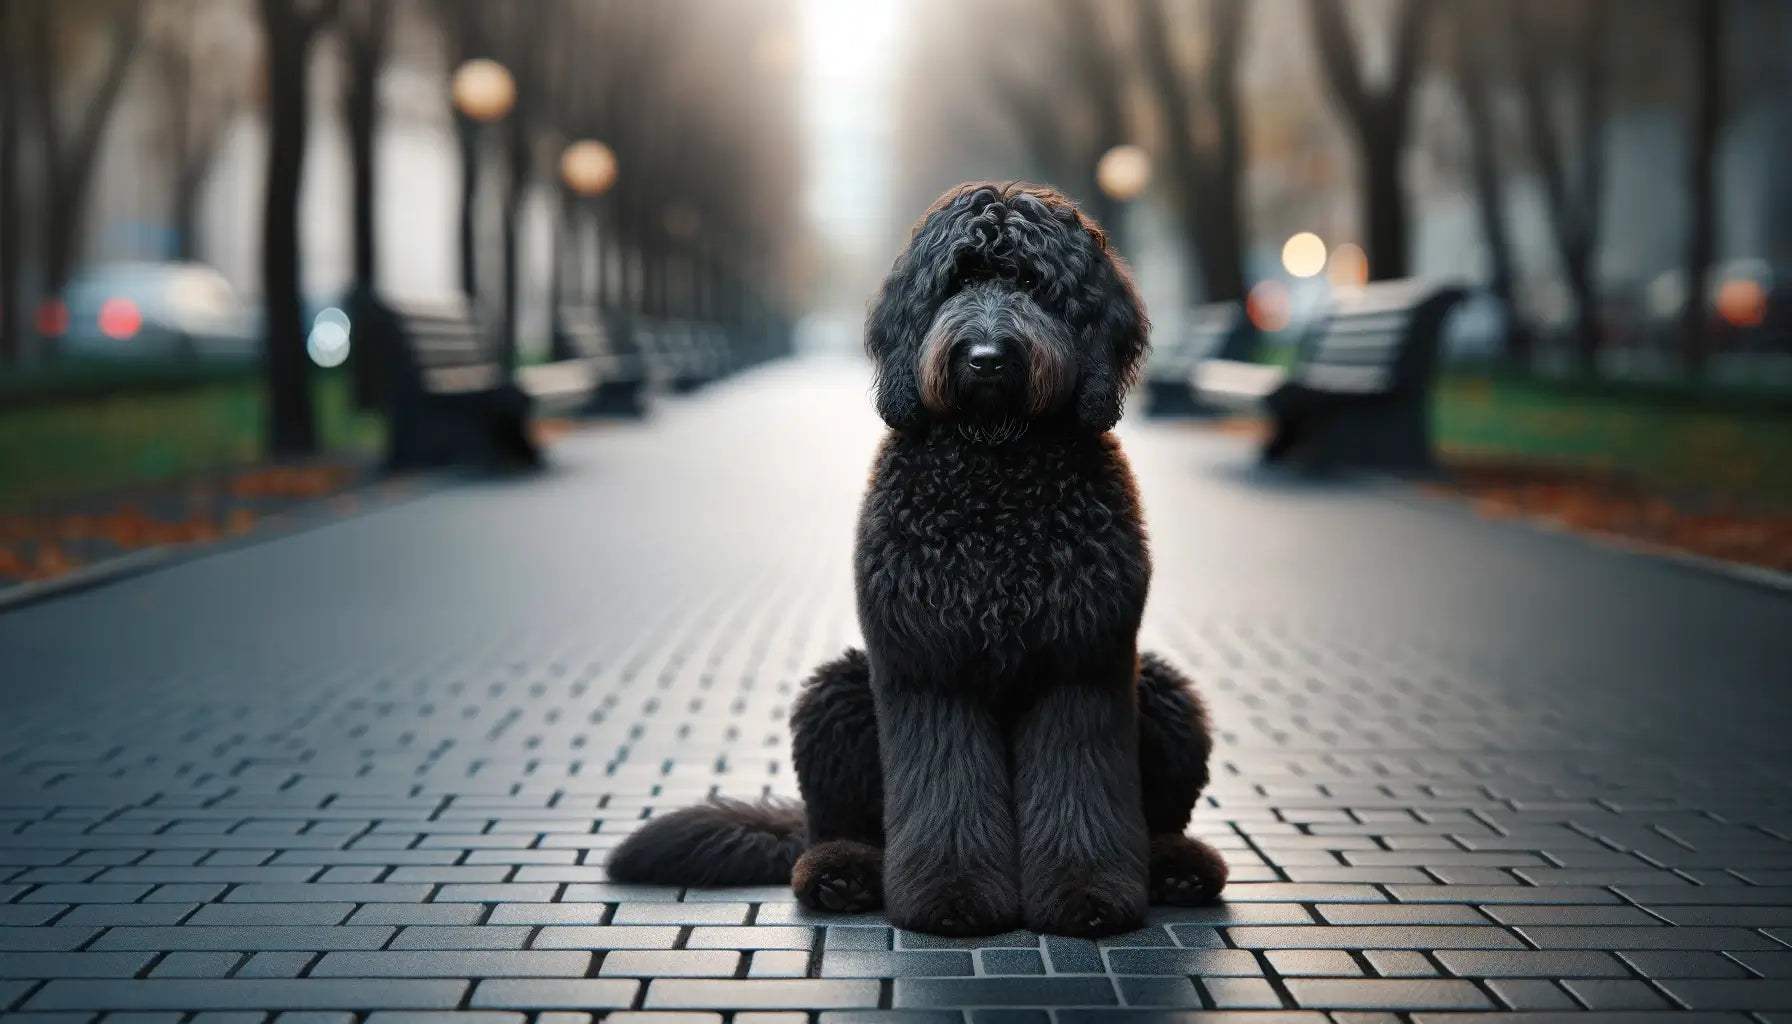 Black Goldendoodle shown sitting on a paved surface outdoors, its shaggy black coat slightly obscuring its eyes.